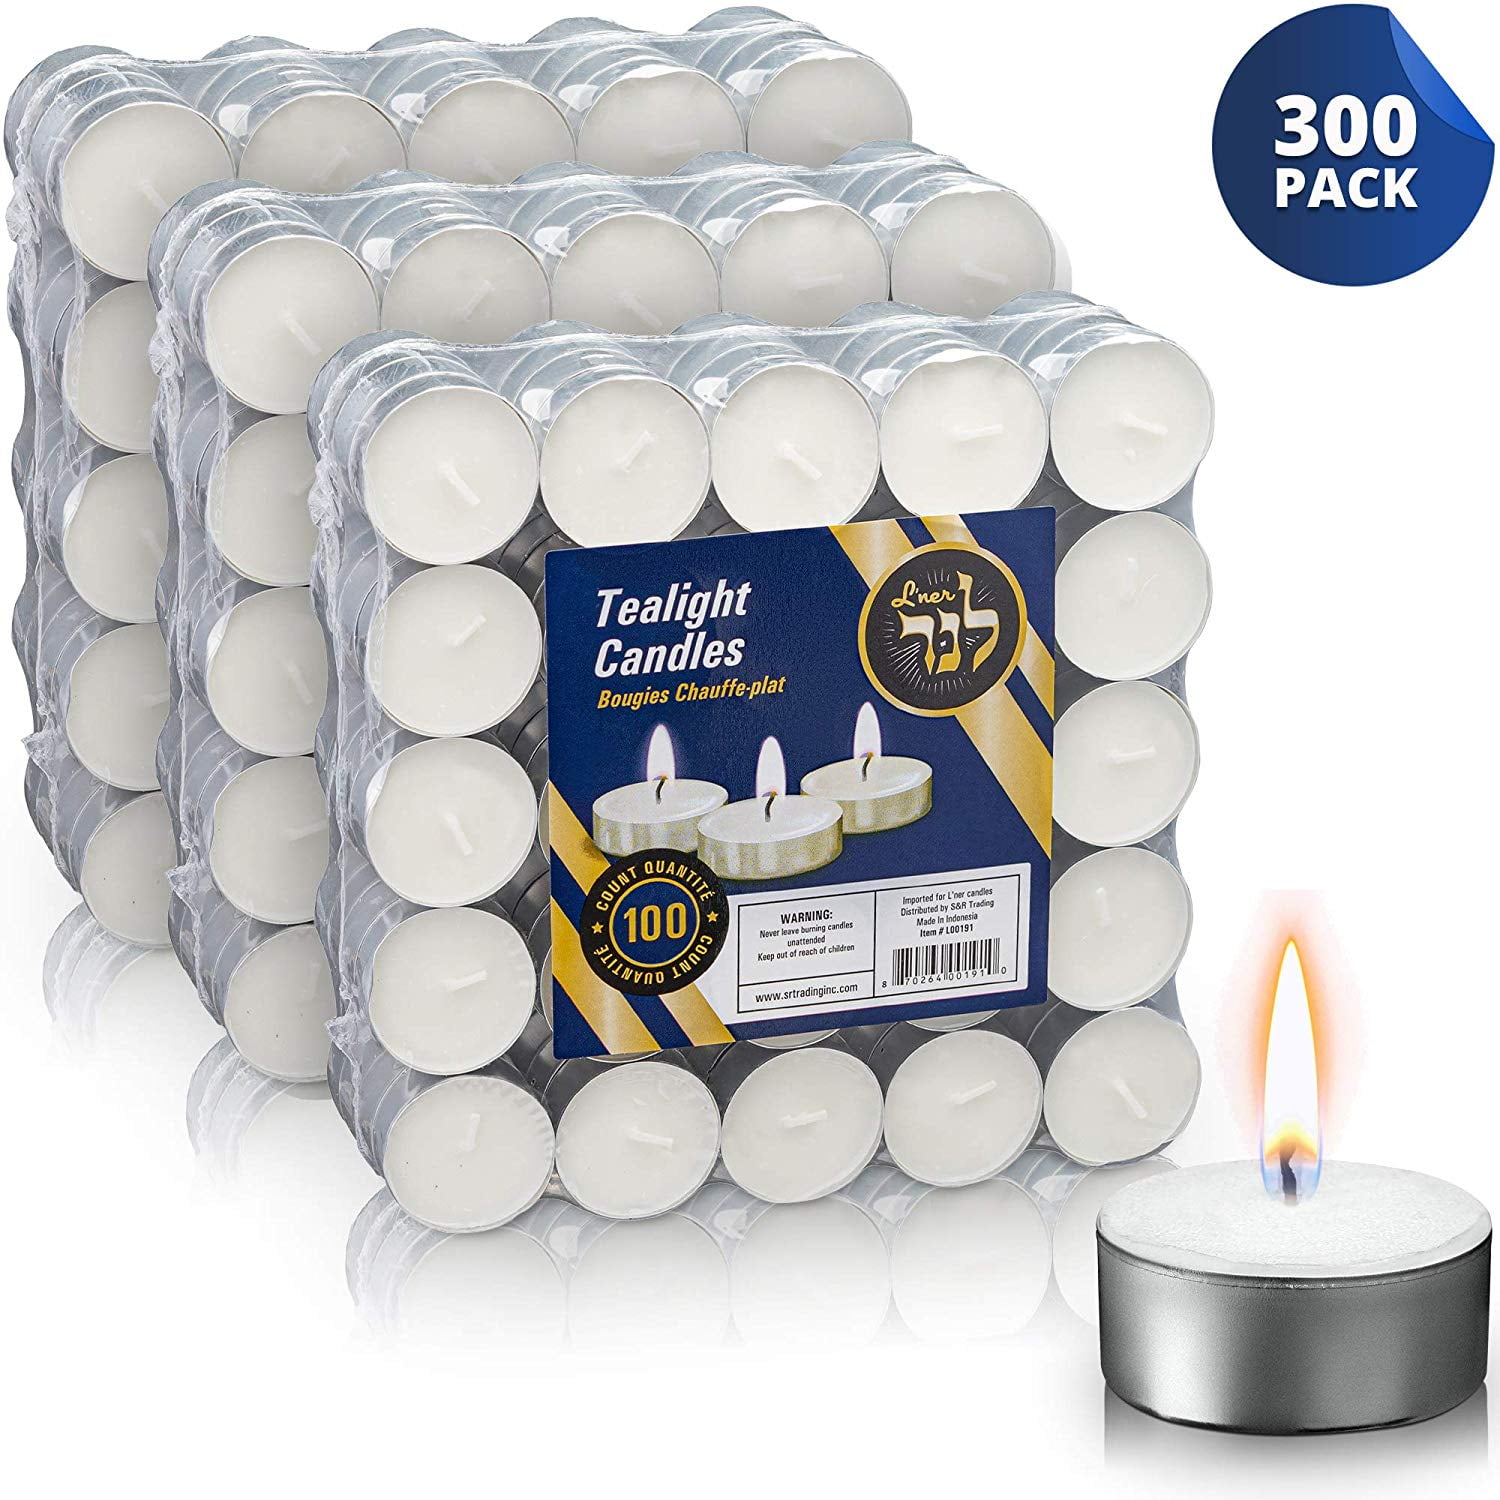 25 Cotton Tea Lights Candles Fresh Scented Fragranced 5HR Burn Time Calm Relax 